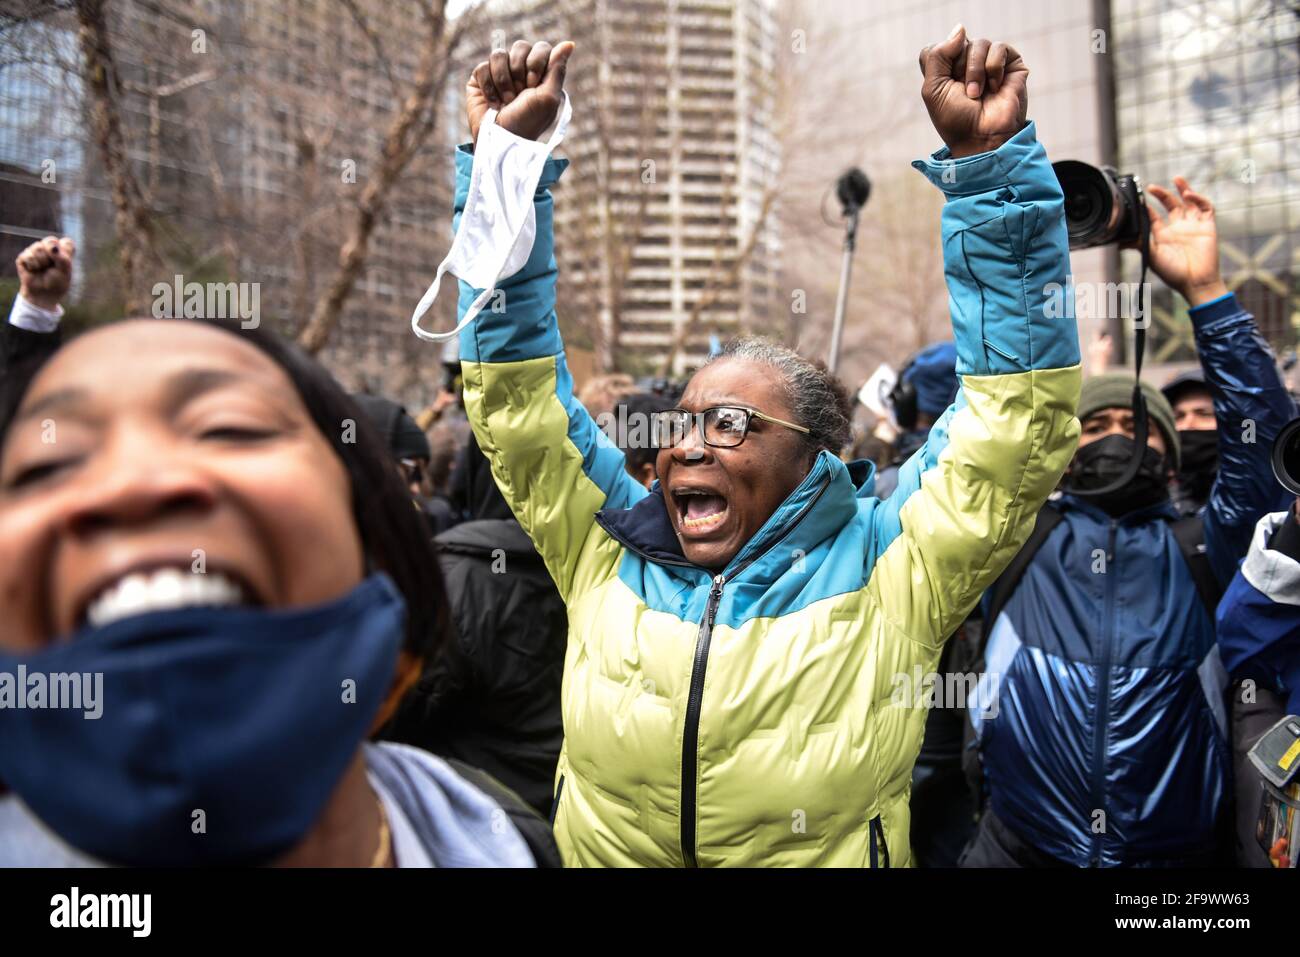 Minneapolis, Minnesota, USA. 20th Apr, 2021. People react to the guilty verdict of the Derek Chauvin trial at the Hennepin County Government Center. Derek Chauvin was found guilty on all three charges in his killing of George Floyd in 2020. Credit: Stephanie Keith/ZUMA Wire/Alamy Live News Stock Photo